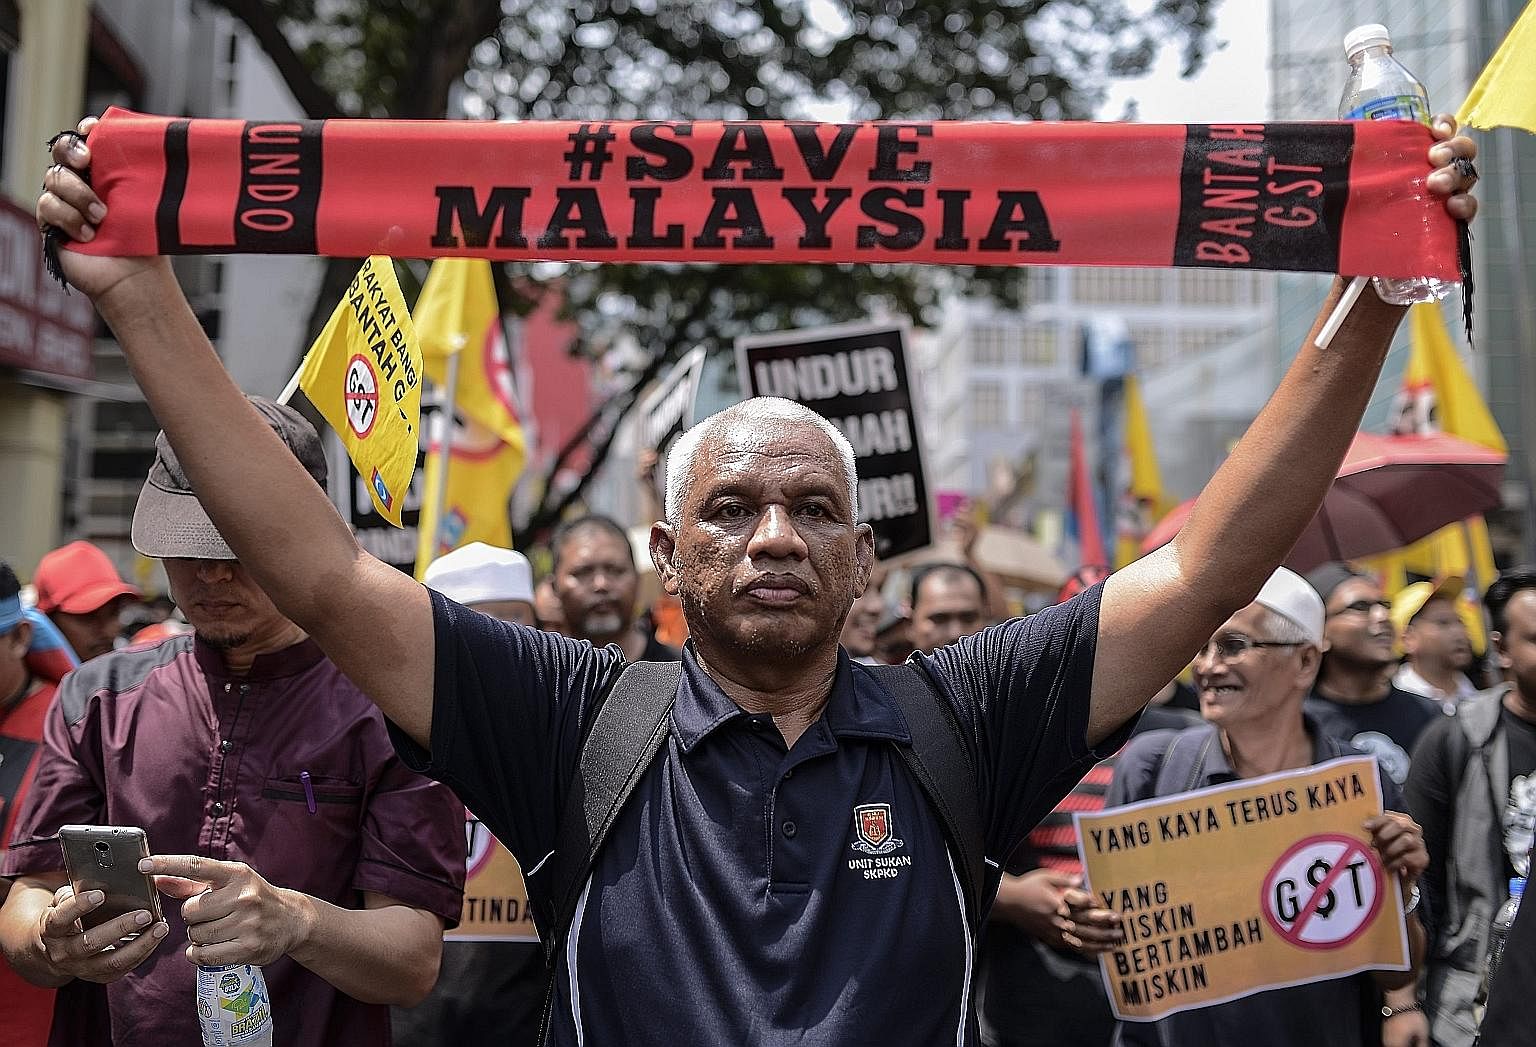 A demonstrator with a Save Malaysia banner during a rally in Kuala Lumpur on April 2. The rally called for the end of the Goods and Services Tax, implemented a year ago, as well as the release of jailed opposition leader Anwar Ibrahim and the resigna